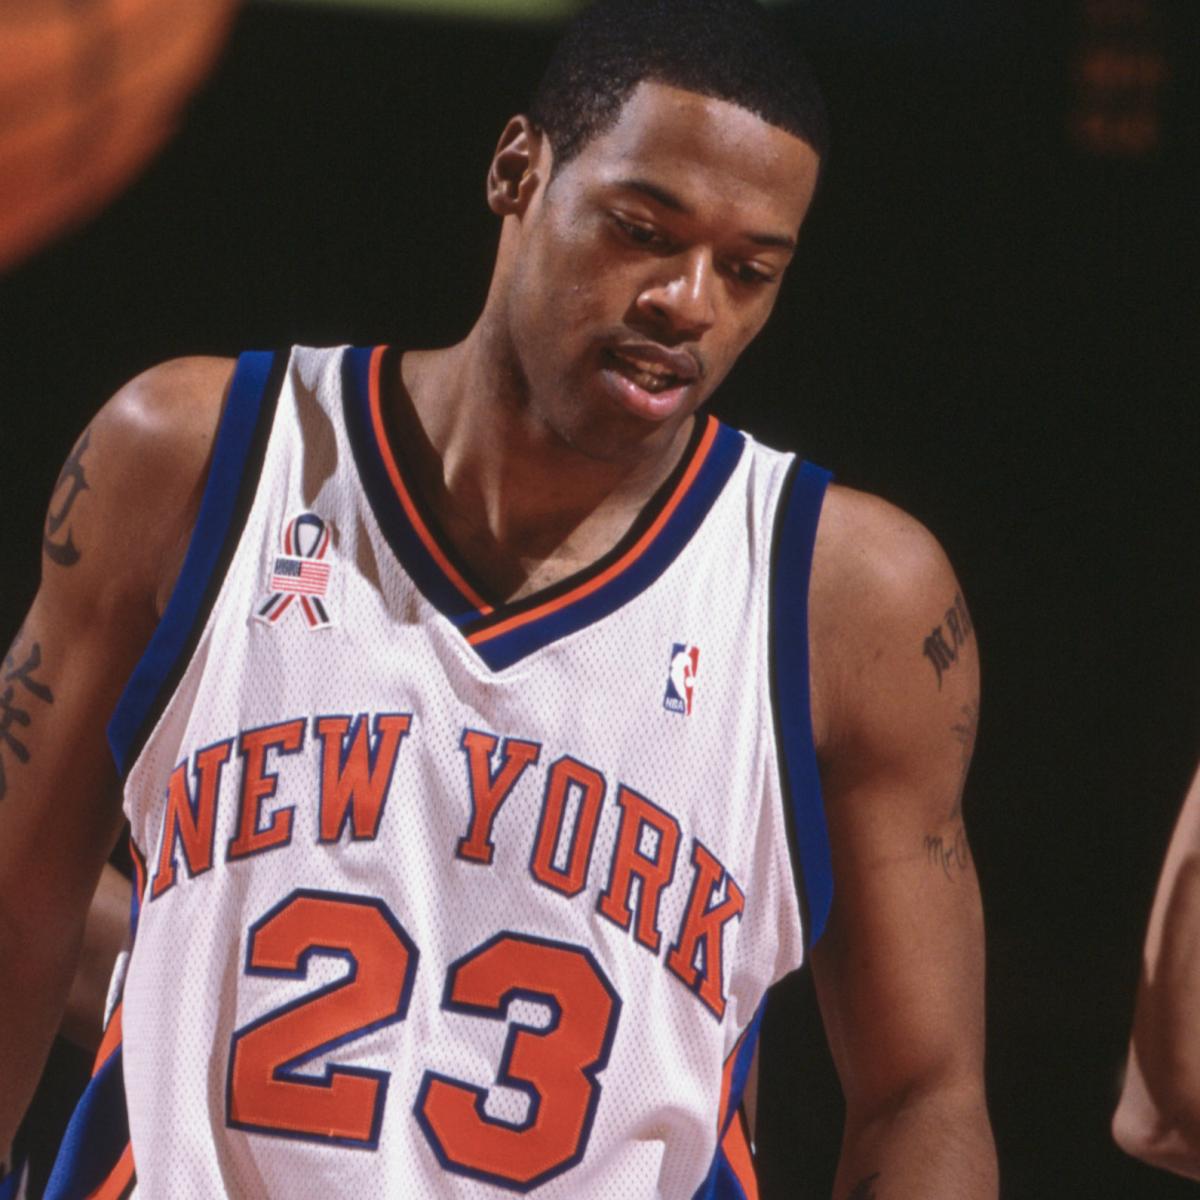 Marcus Camby coming back to Knicks as part of sign-and-trade with